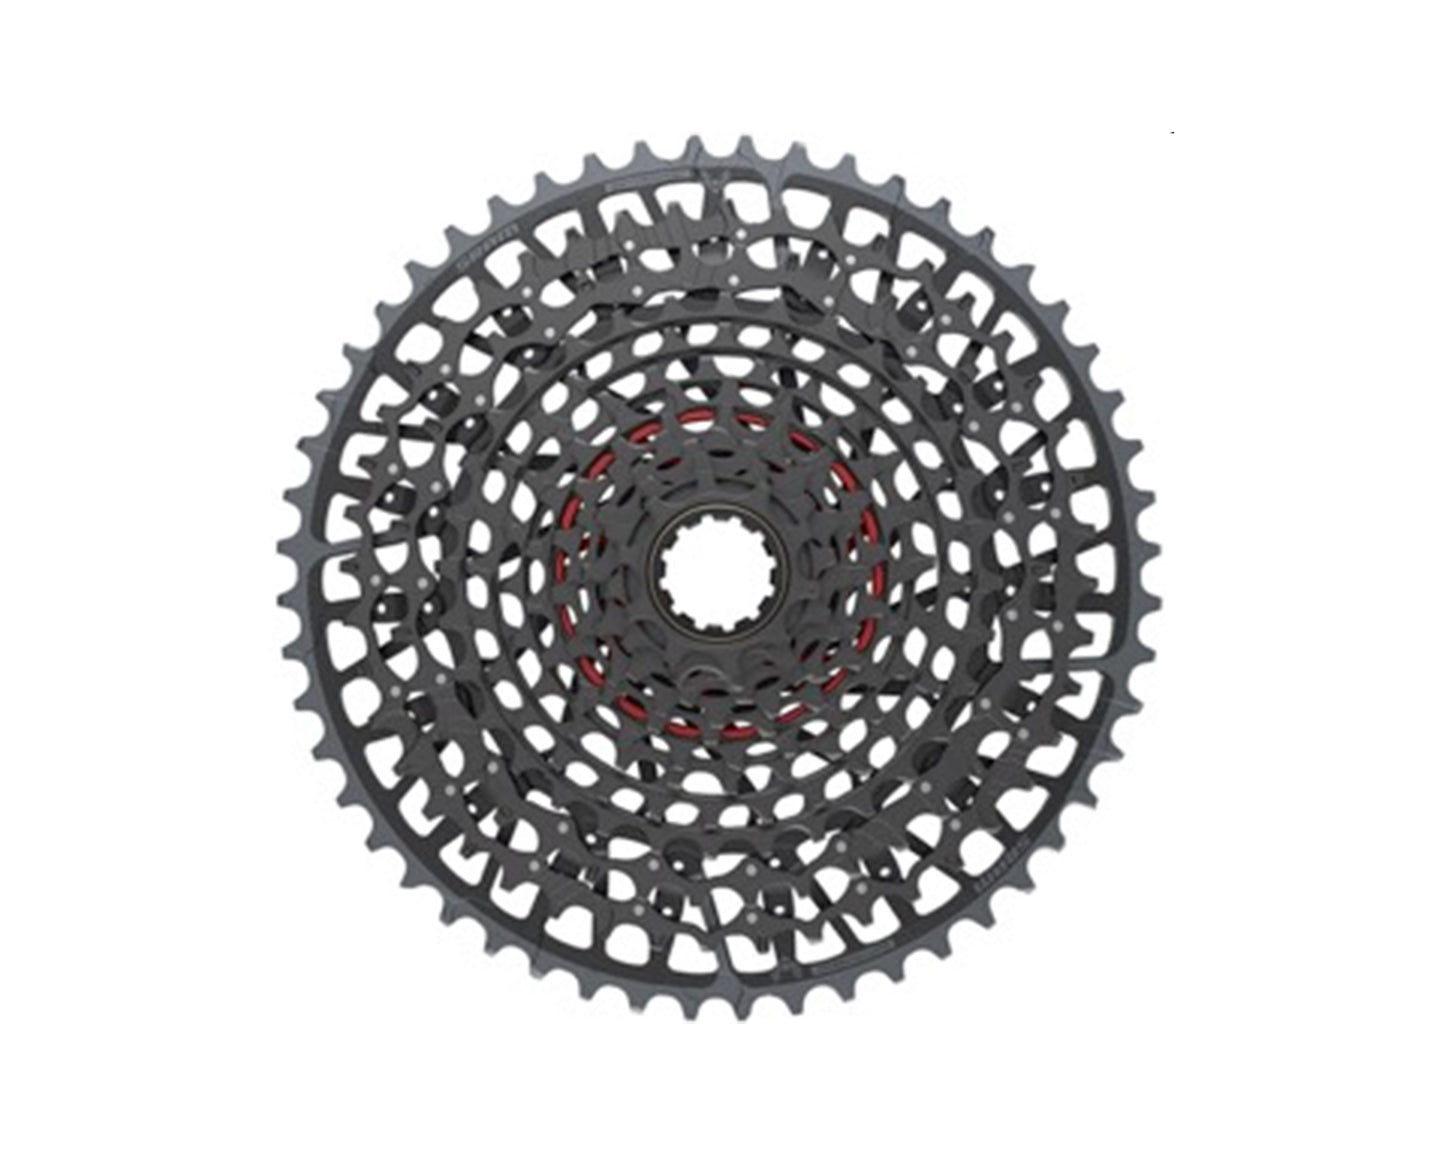 SRAM X0 EAGLE T-TYPE XS-1295 CASSETTE - 12-SPEED, 10-52T, FOR XD DRIVER, BLACK